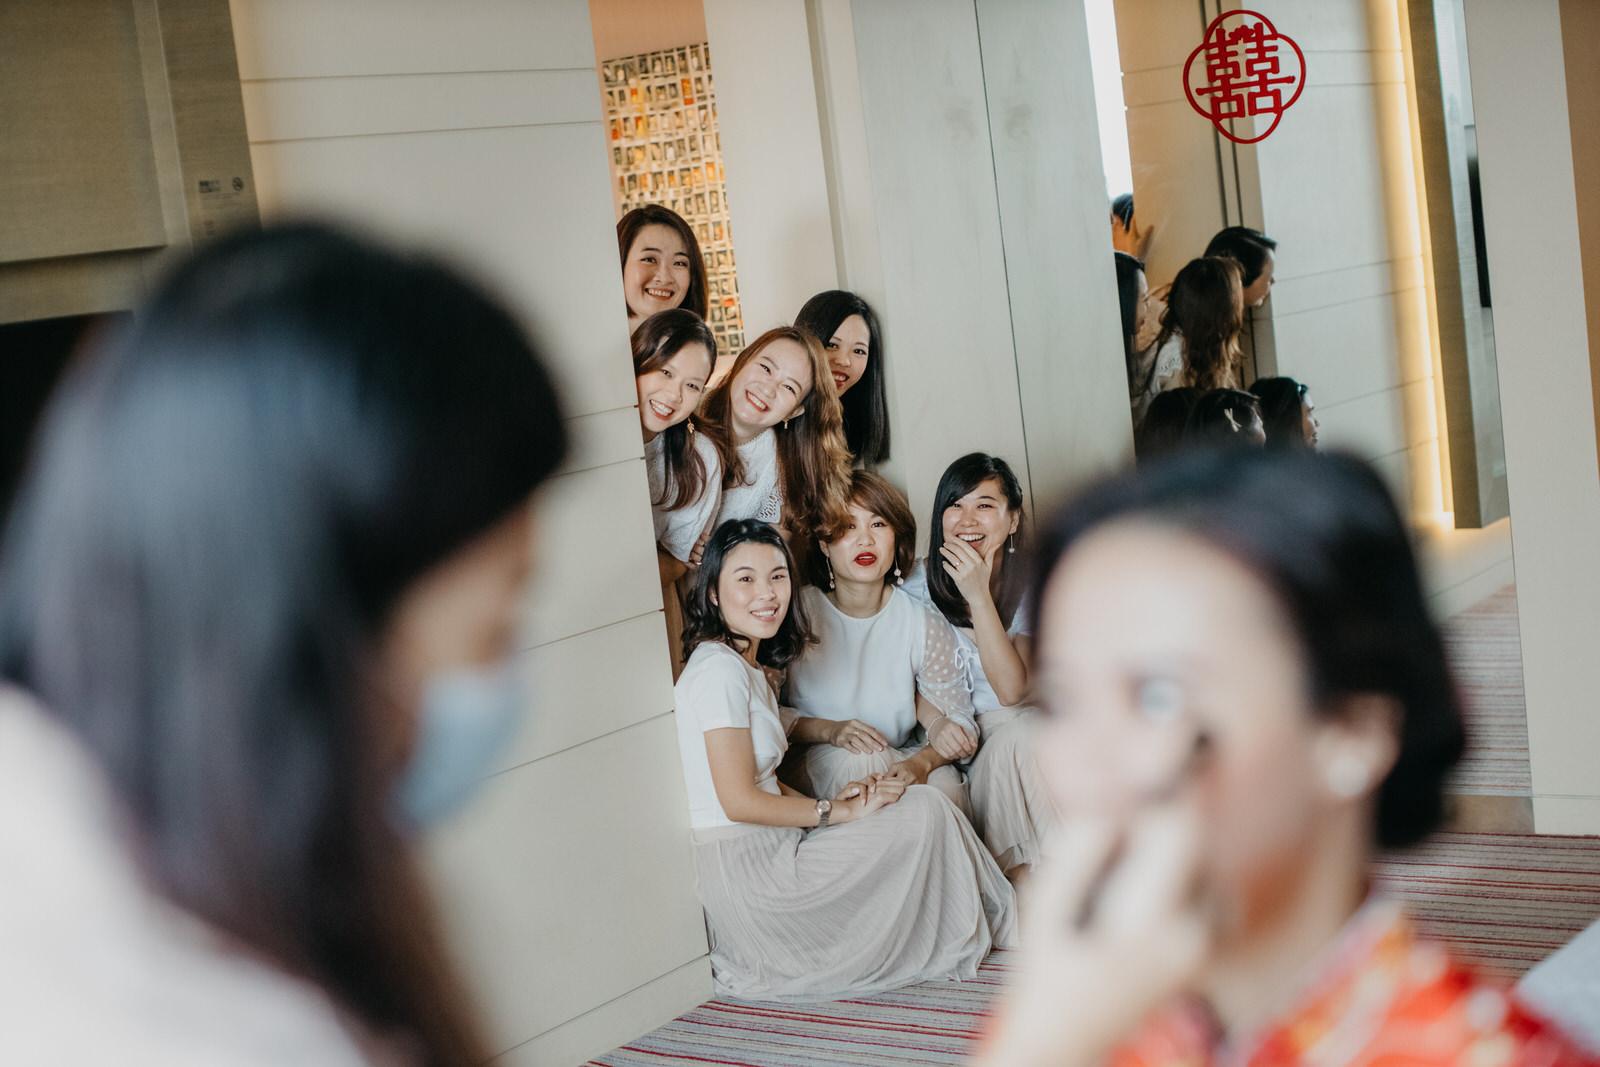 Bride on Red Chinese Kwa Moment Shot with Bridesmaids Wedding in Kuala Lumpur